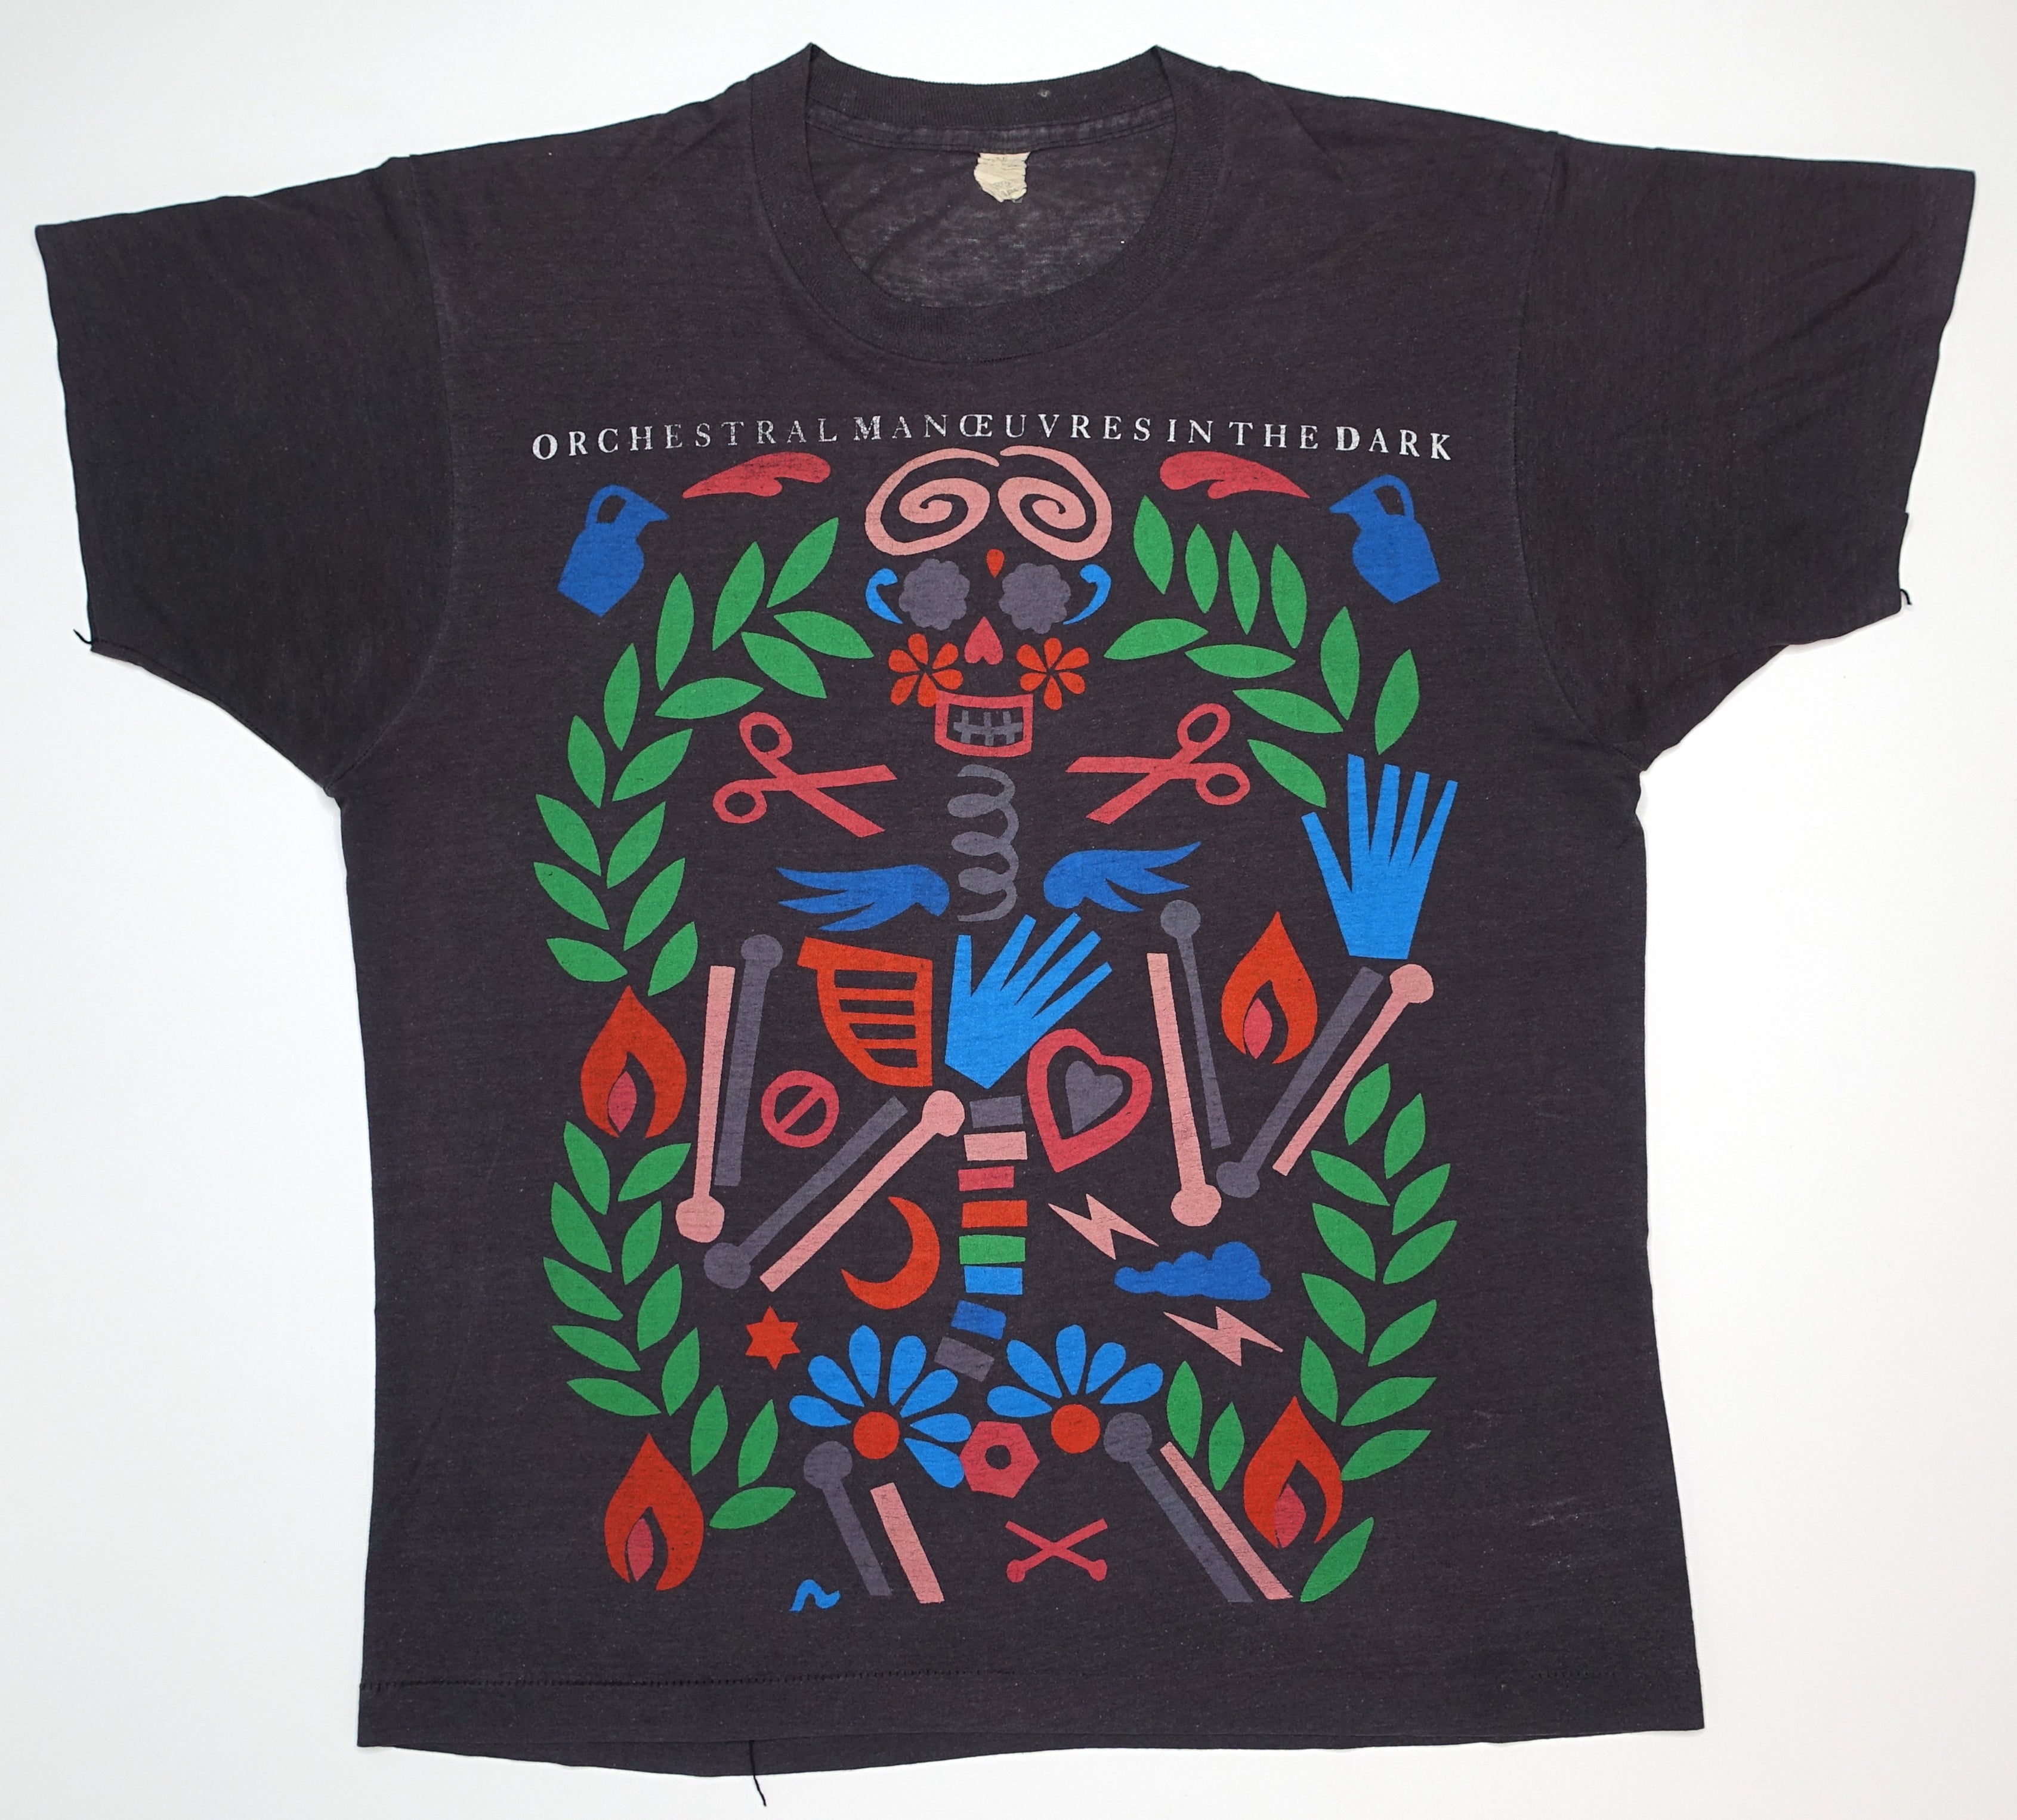 Orchestral Manoeuvres In The Dark (OMD) - So In Love 1985 Tour Shirt Size XL